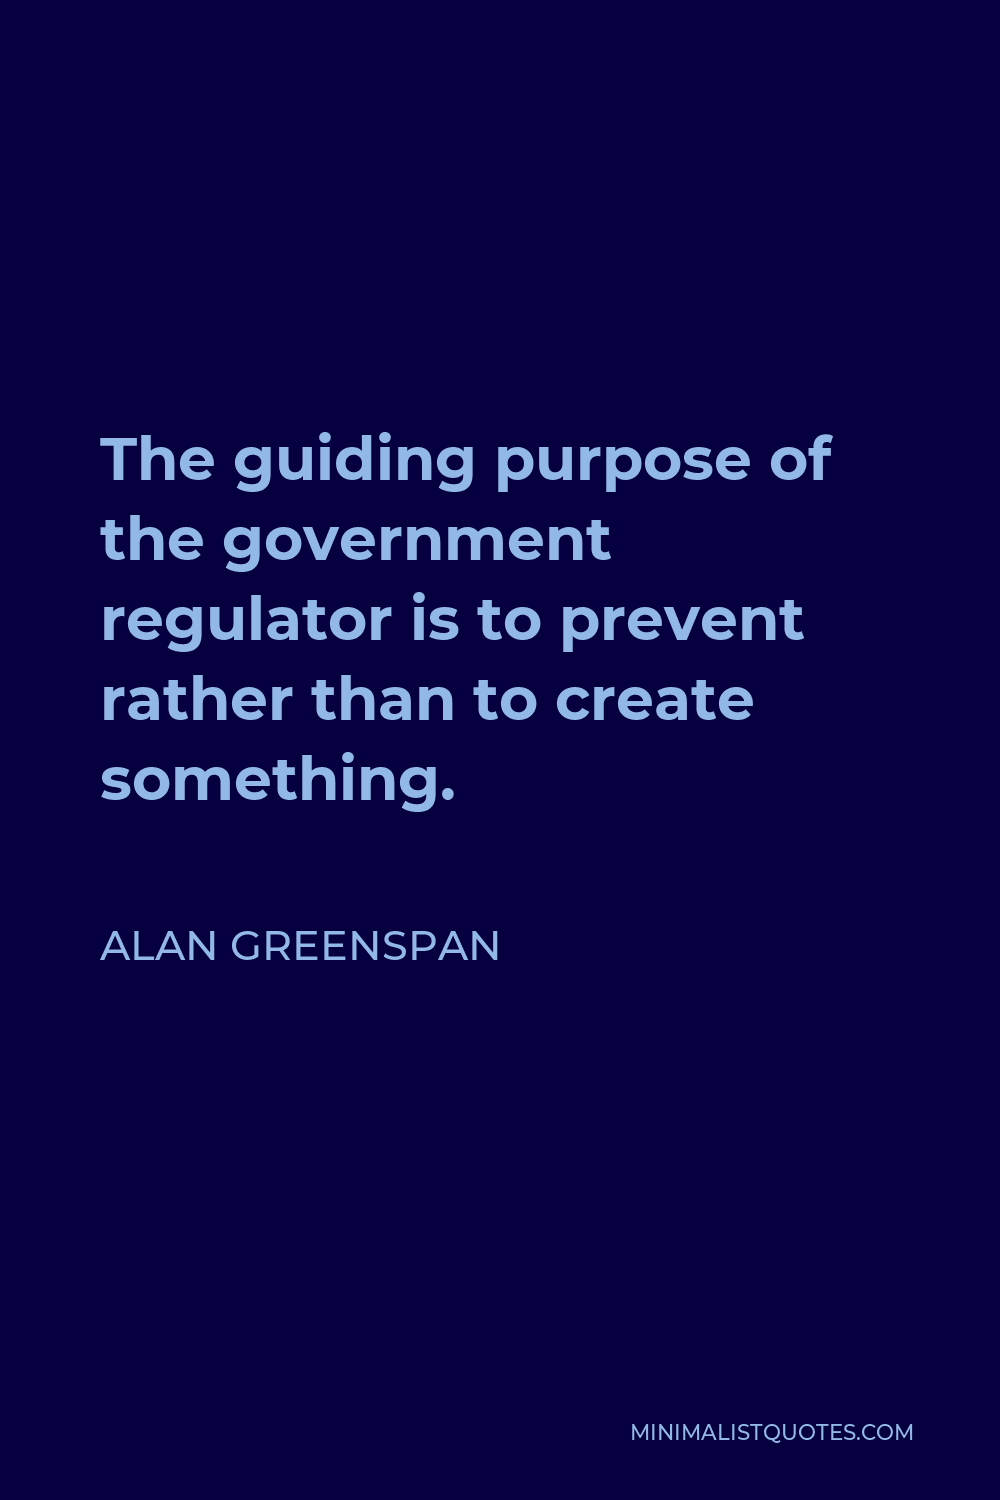 Alan Greenspan Quote - The guiding purpose of the government regulator is to prevent rather than to create something.